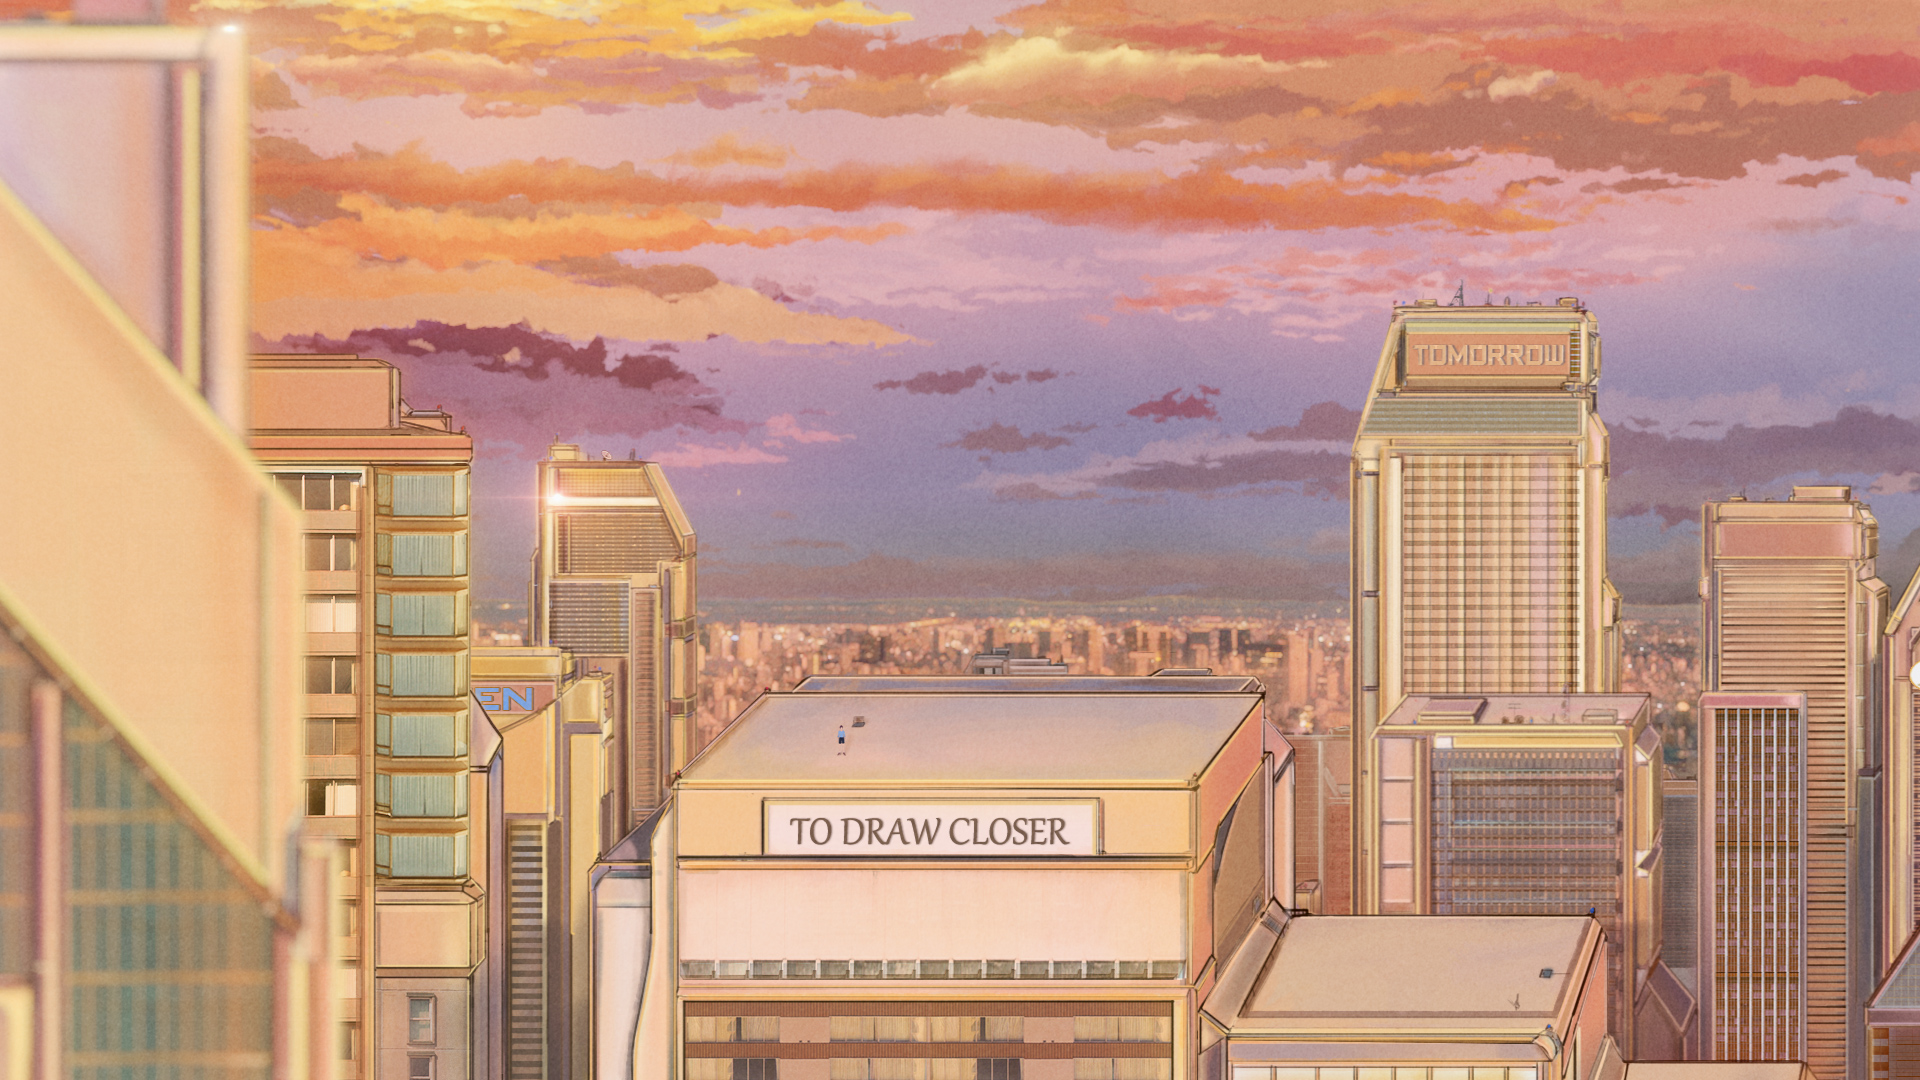 Building Digital Art Anime City City Sunset Glow Sunset Clouds Sky Anime Cityscape Rooftops Outdoors 1920x1080